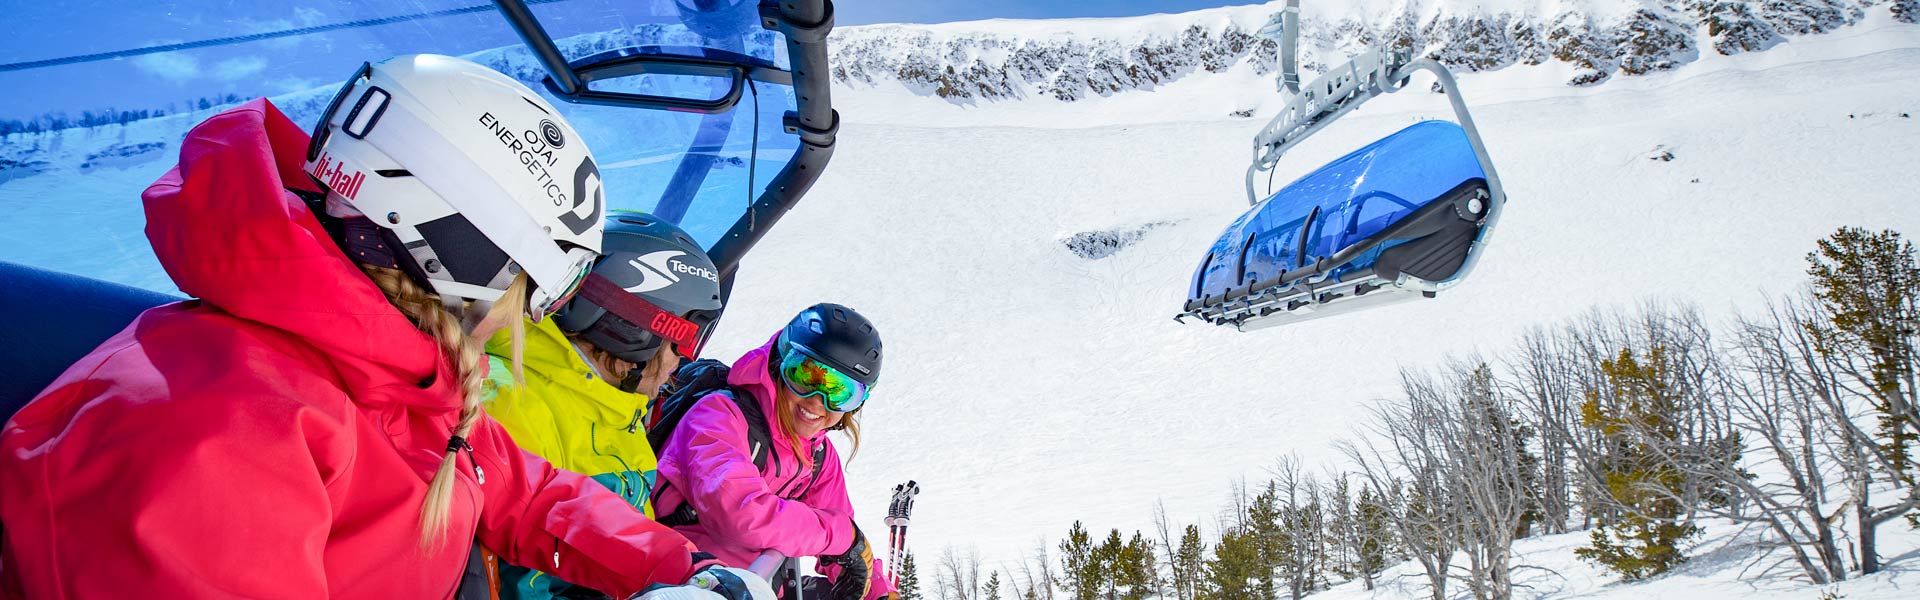 Group of skiers on a chairlift